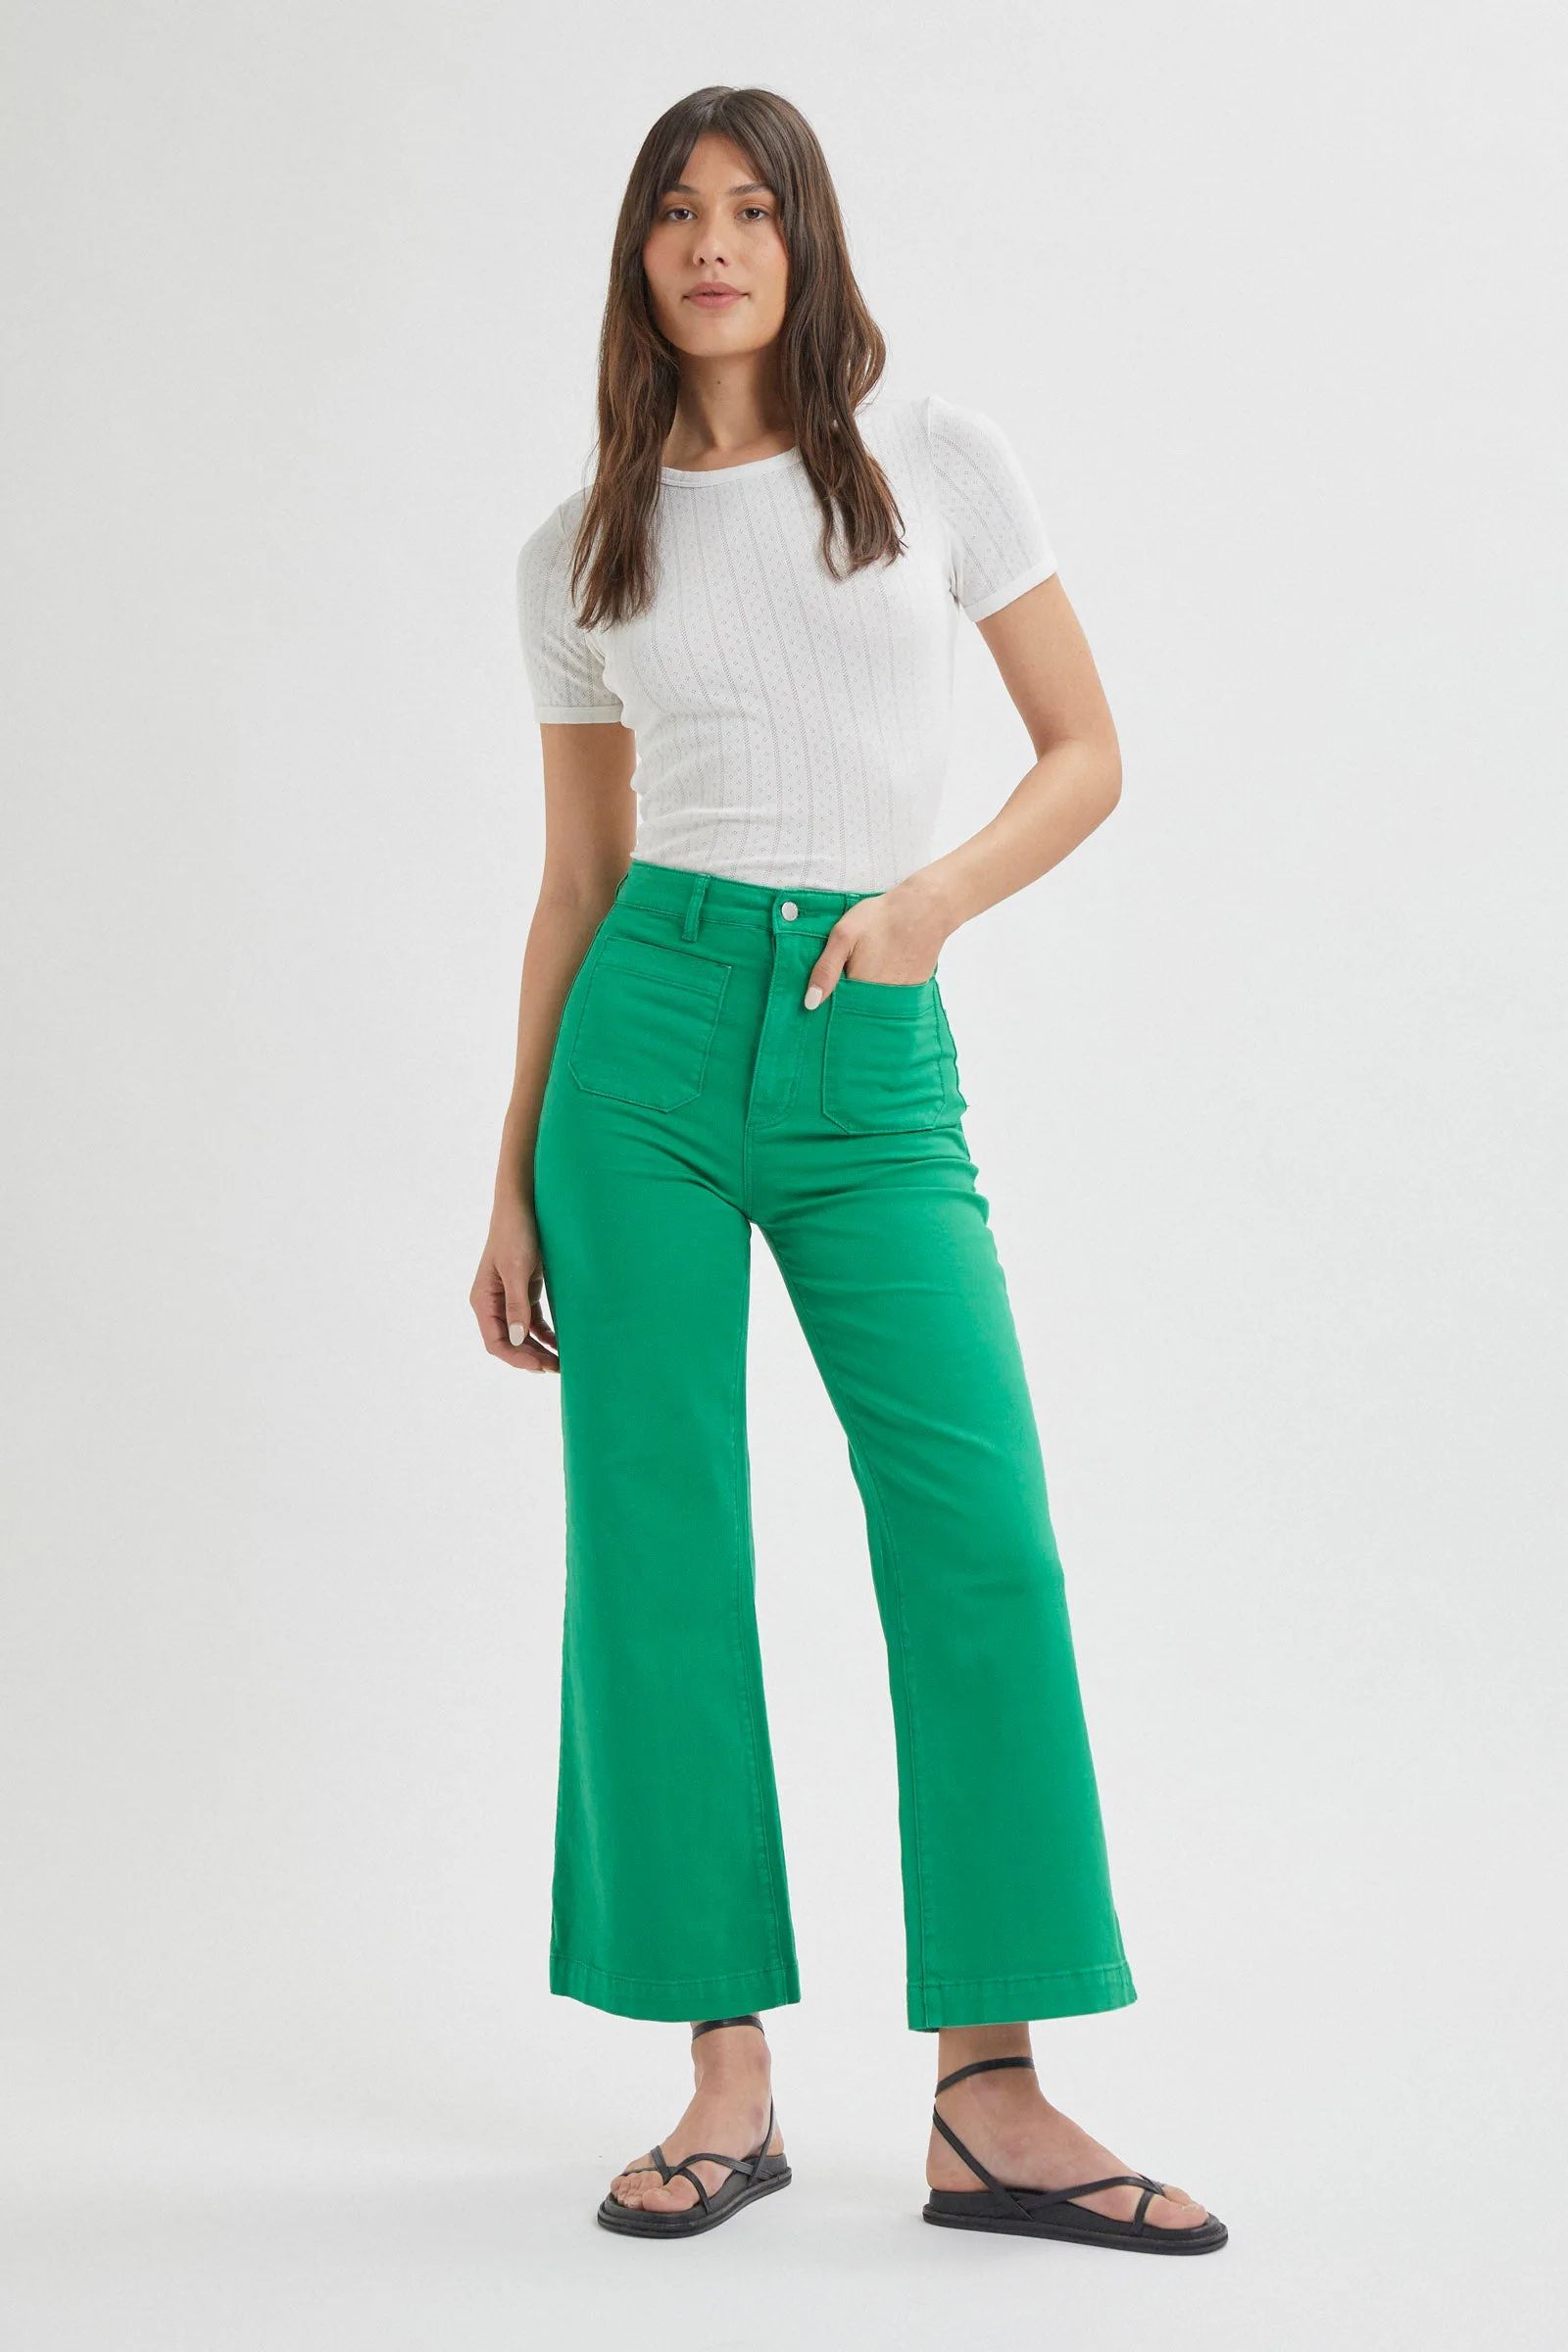 Buy Sailor Jean - Grass Online | Rollas Jeans | Rolla's Jeans US/CAN